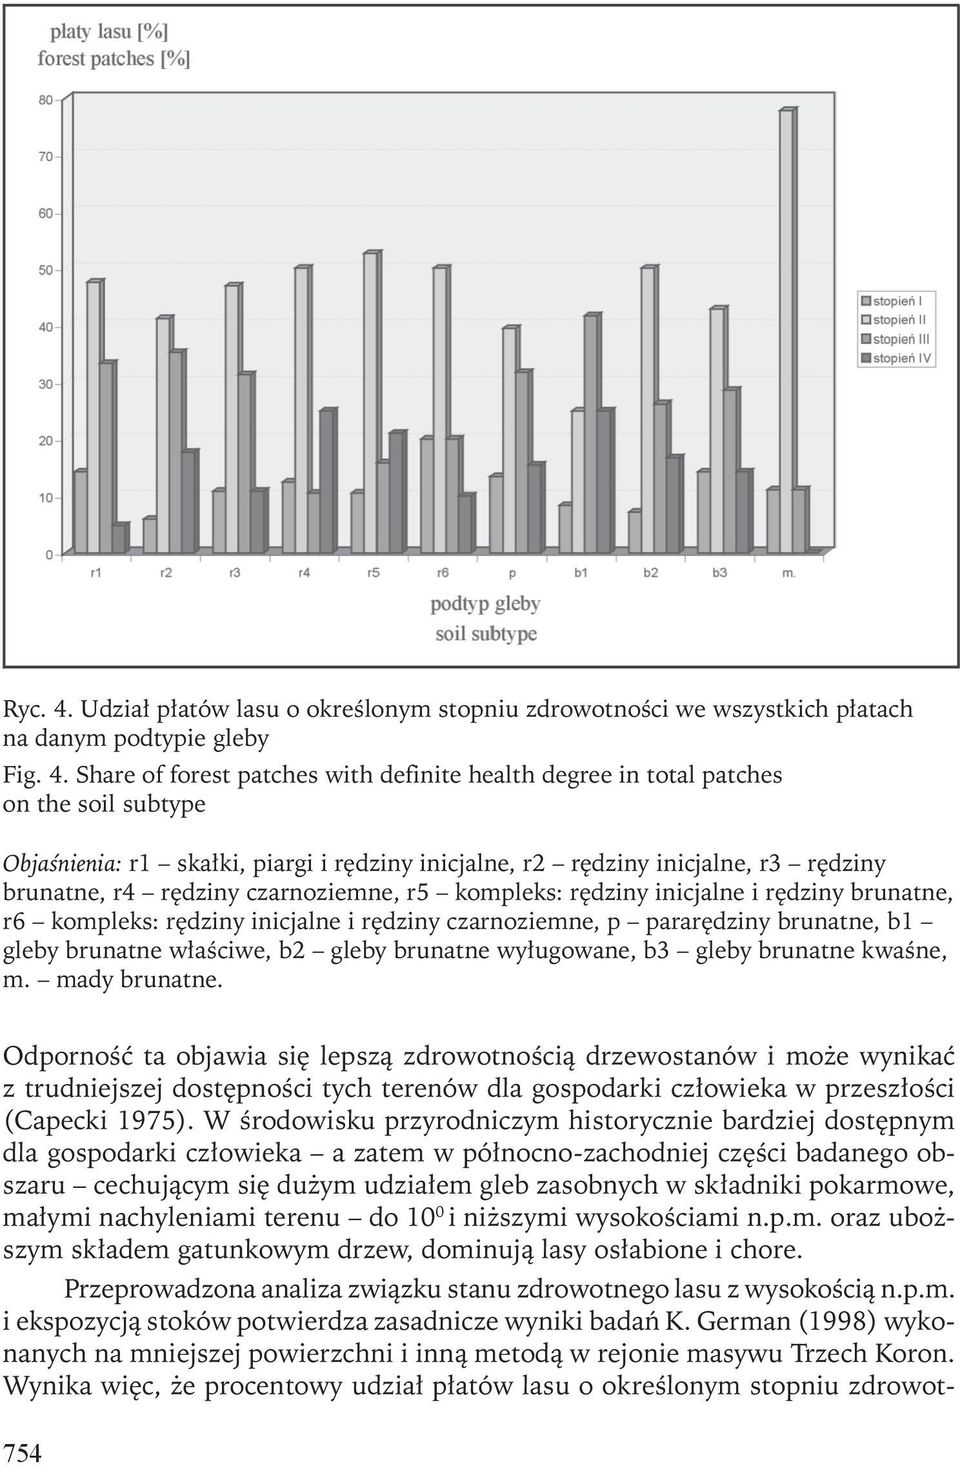 Share of forest patches with definite health degree in total patches on the soil subtype Objaśnienia: r1 skałki, piargi i rędziny inicjalne, r2 rędziny inicjalne, r3 rędziny brunatne, r4 rędziny